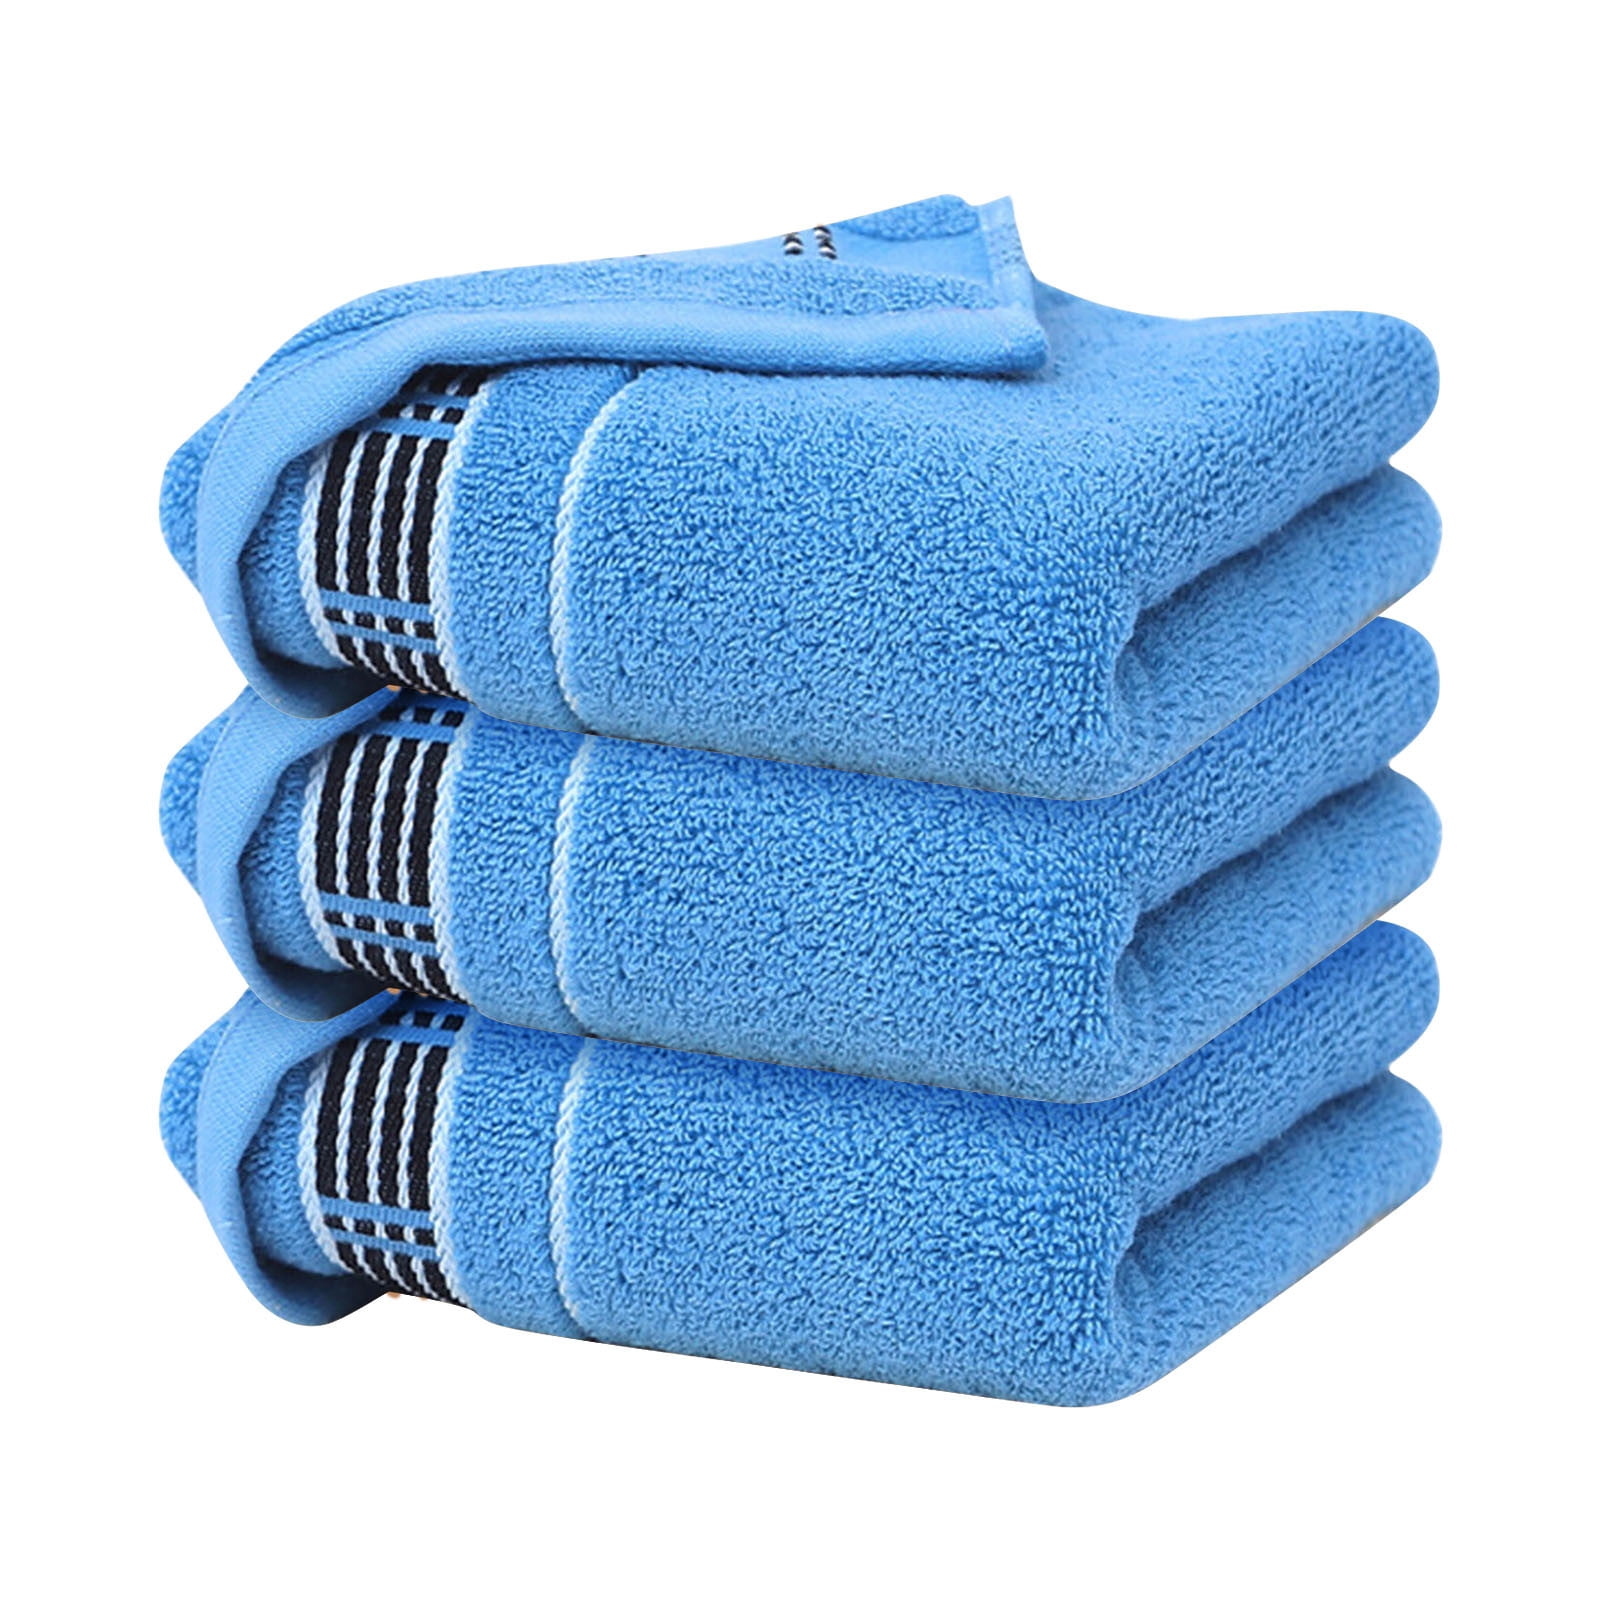 Lovely & Colorful Cotton Hand Towels ( Light Blue, 2-Pack, 14 inch x 29 inch) for Bath, Hand, Face, Gym and Spa